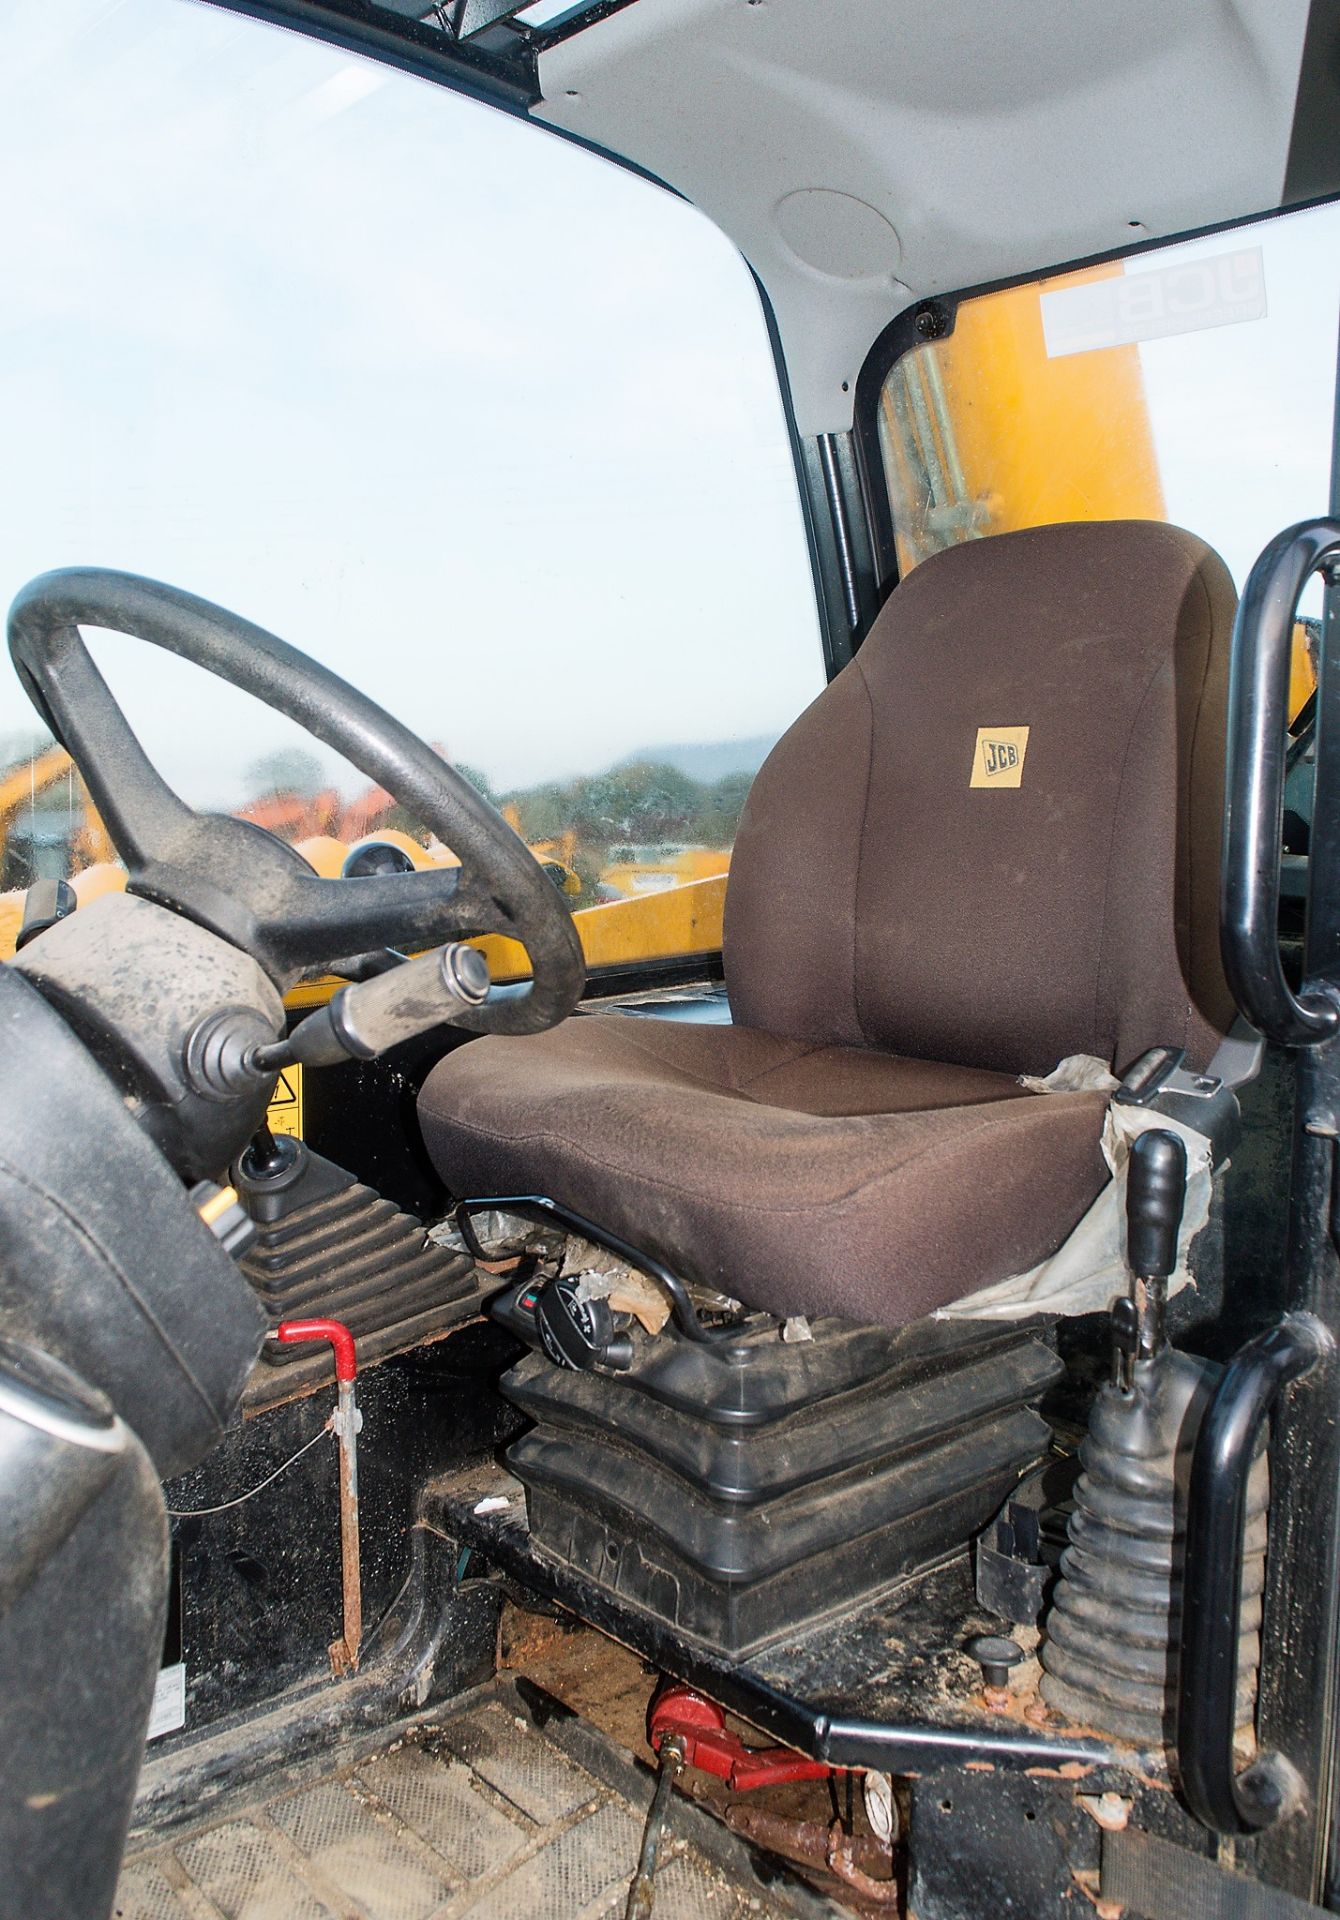 JCB 531-70 telescopic handler  Year: 2014 S/N: 2337067 Recorded Hours: 2043 A627467 - Image 17 of 19